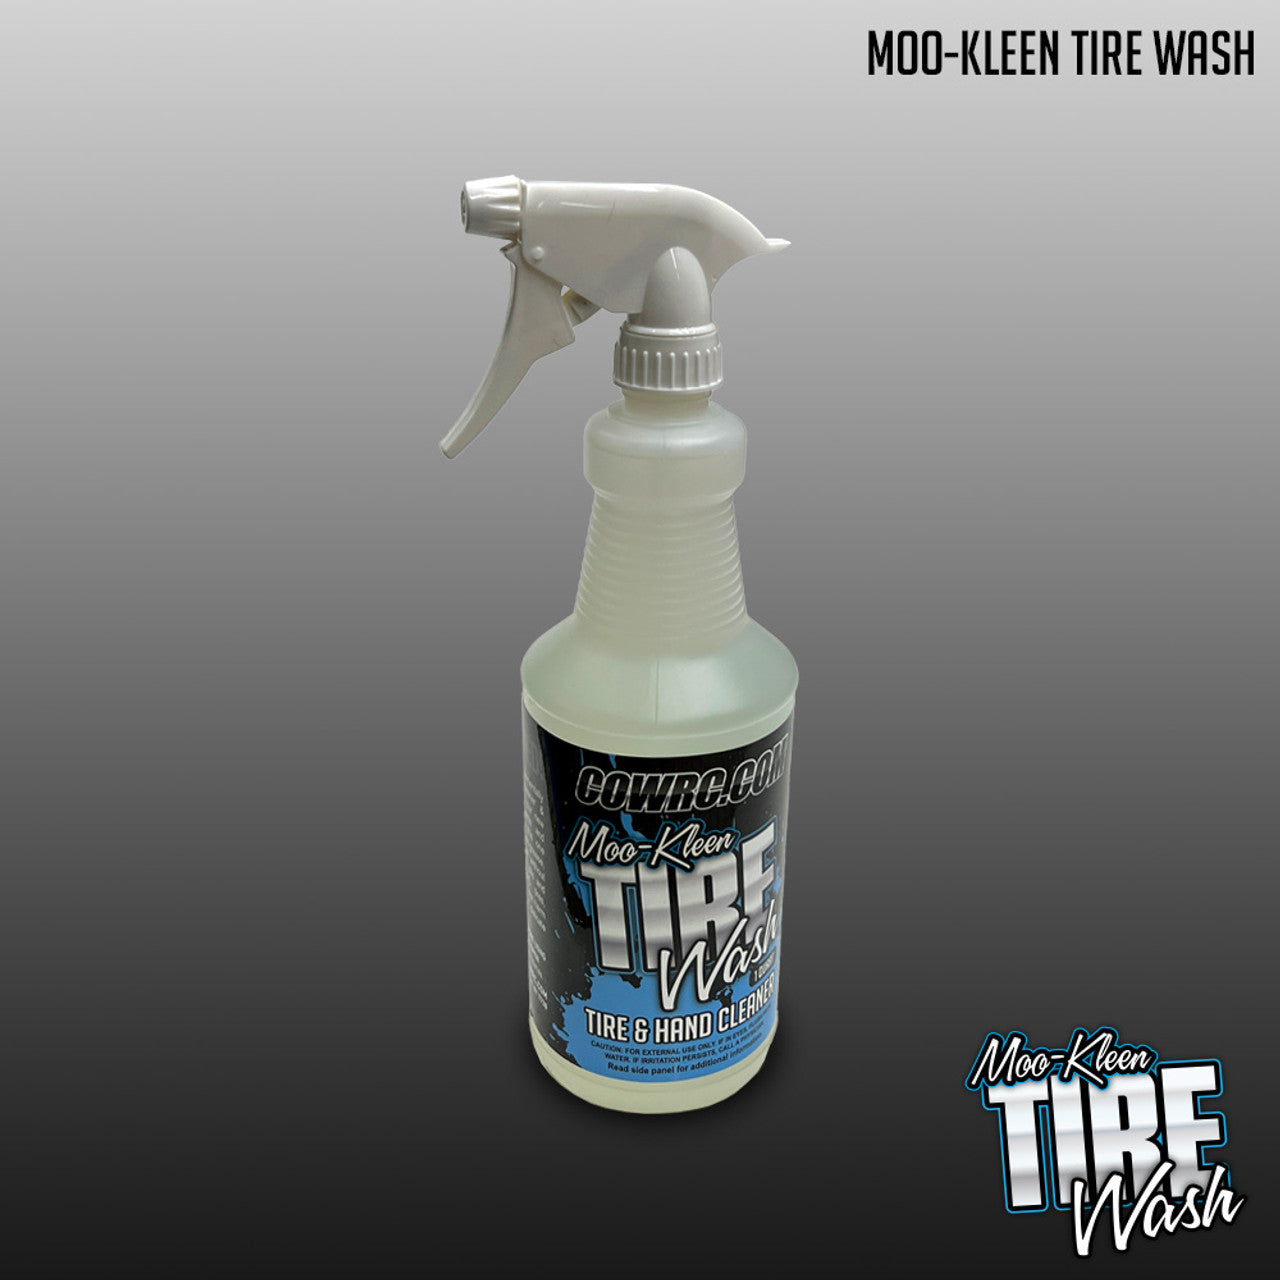 MOO-KLEEN TIRE WASH AND HAND CLEANER